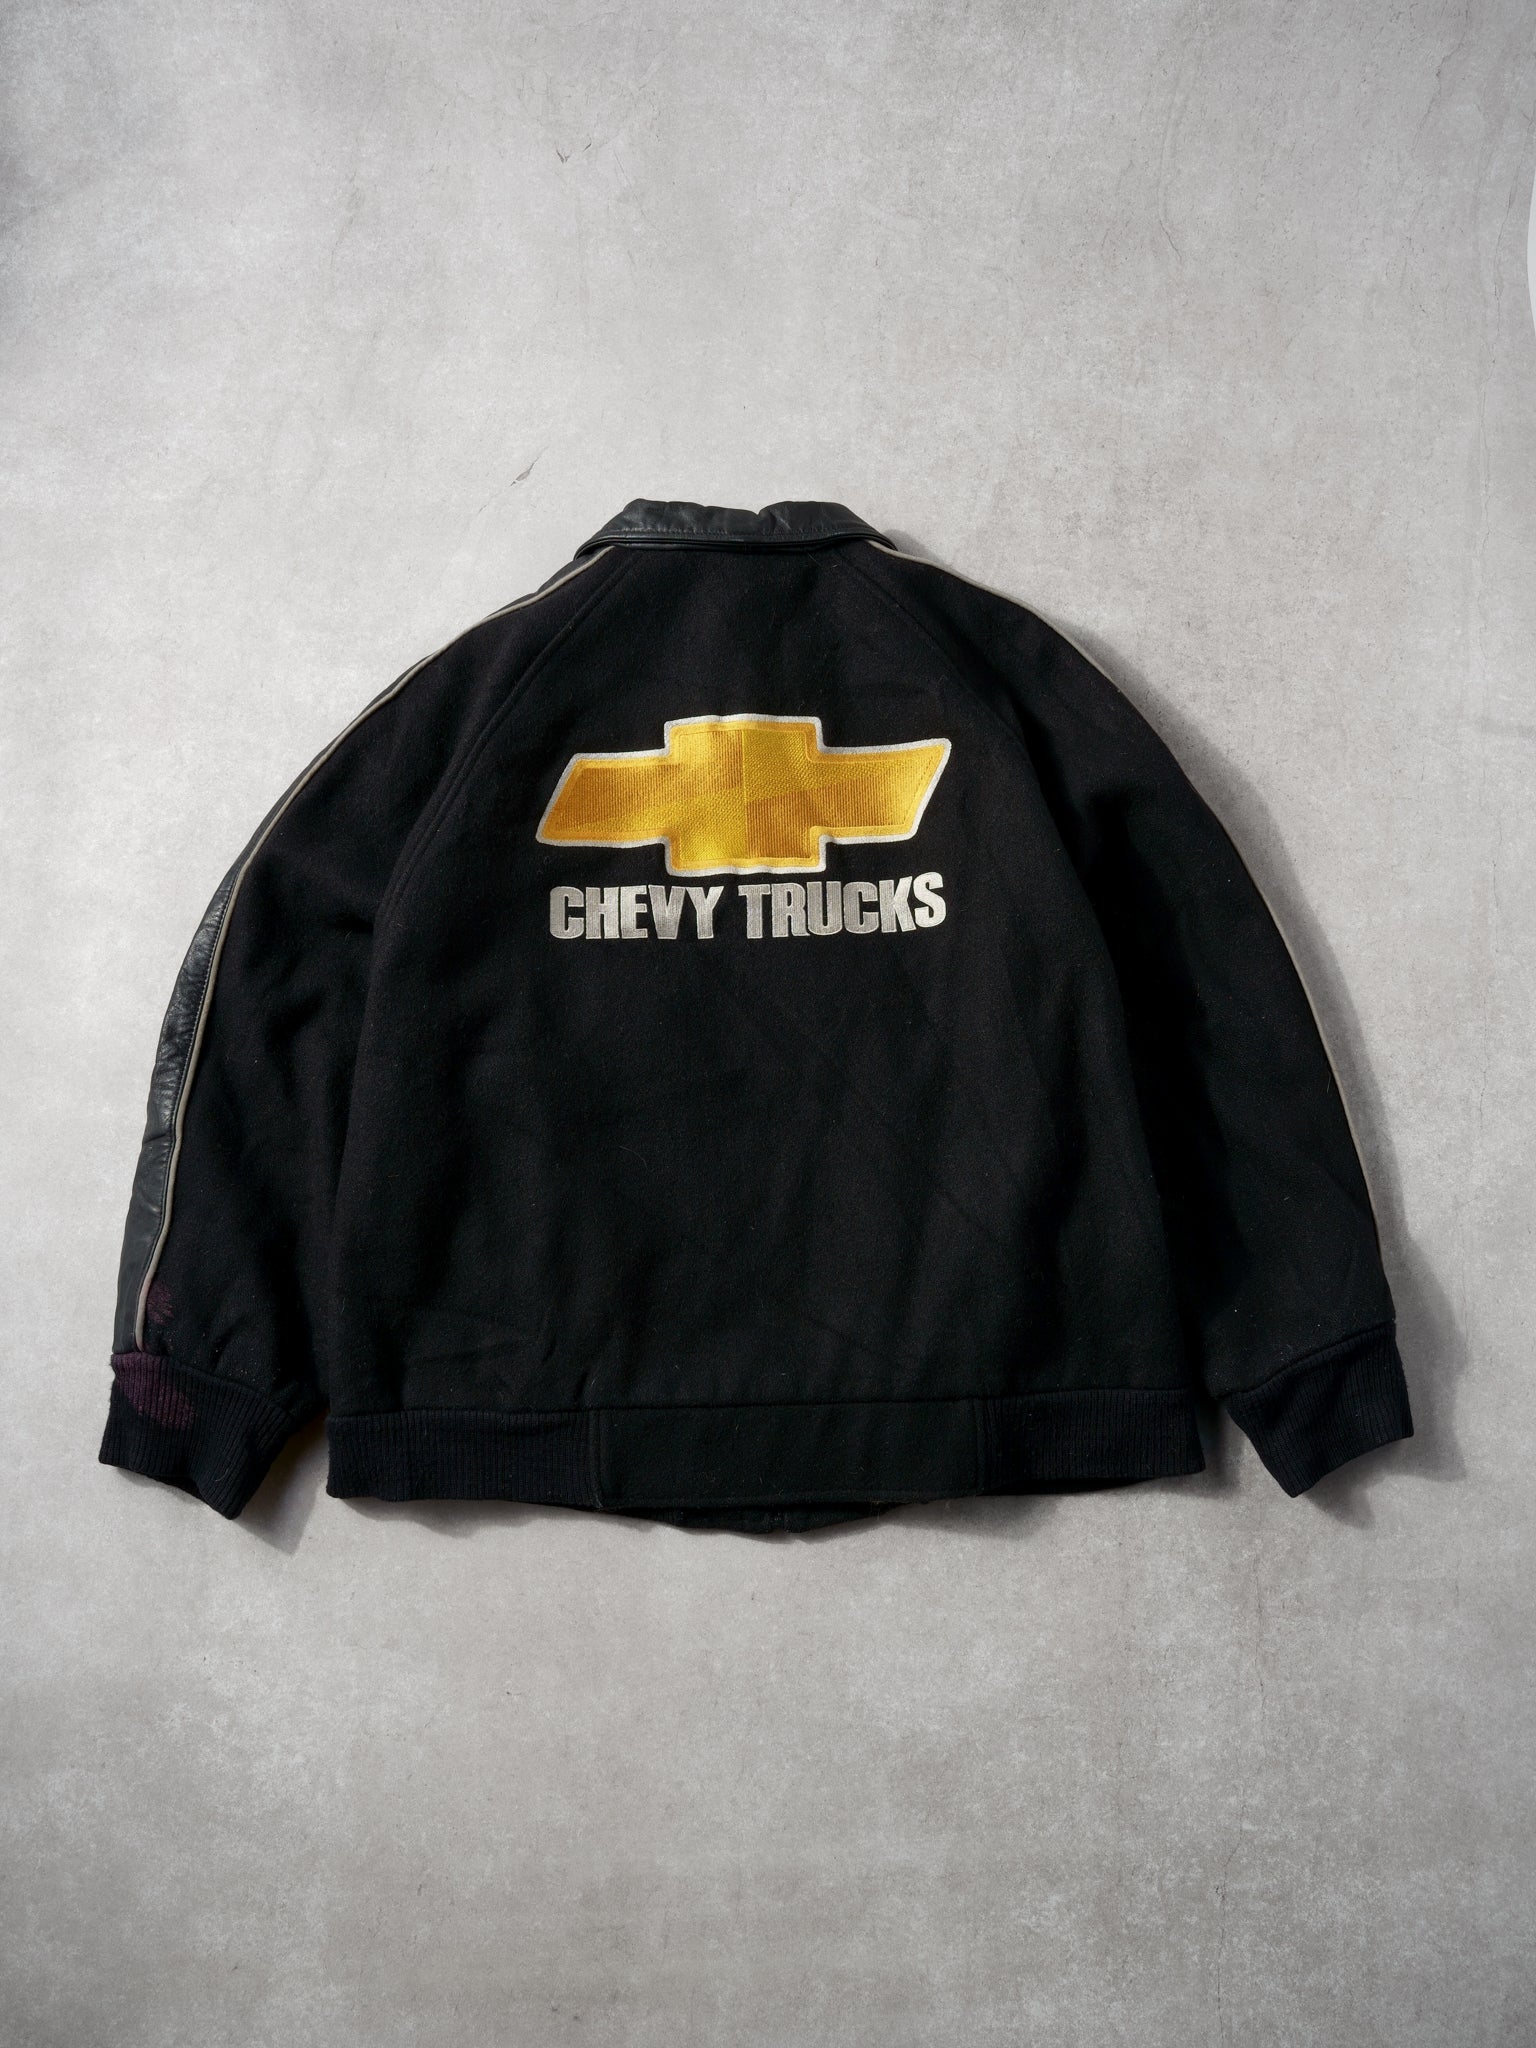 Vintage 90 Black Chevy Trucks Collared Leather Jacket (L)